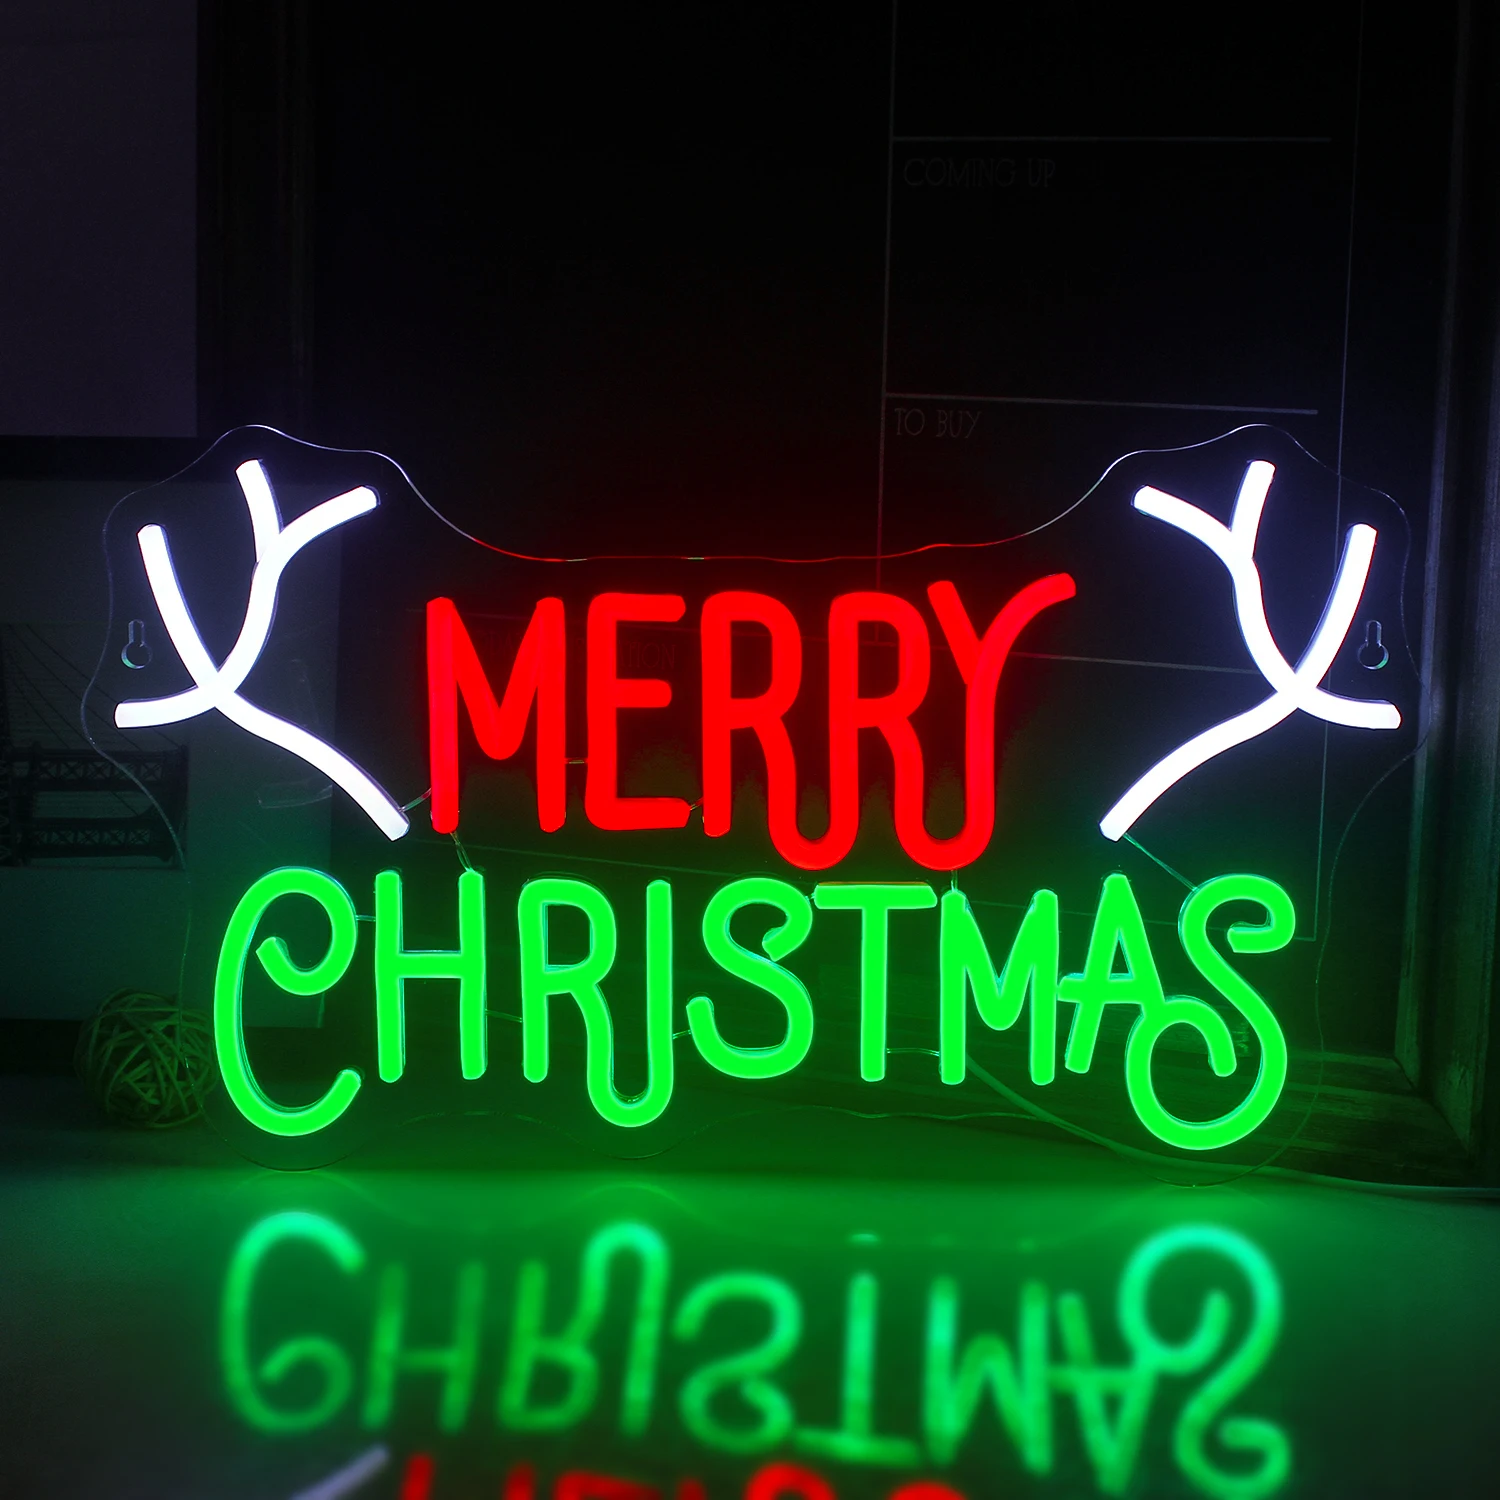 Merry Christmas Neon Sign Led Neon Wall Light Acrylic Board for Christmas Party Supplies Bedroom Wedding Bar Pub Club Christmas christmas neon neon lights led acrylic board neon signs for wall decor christmas party supplies bedroom bar pub club